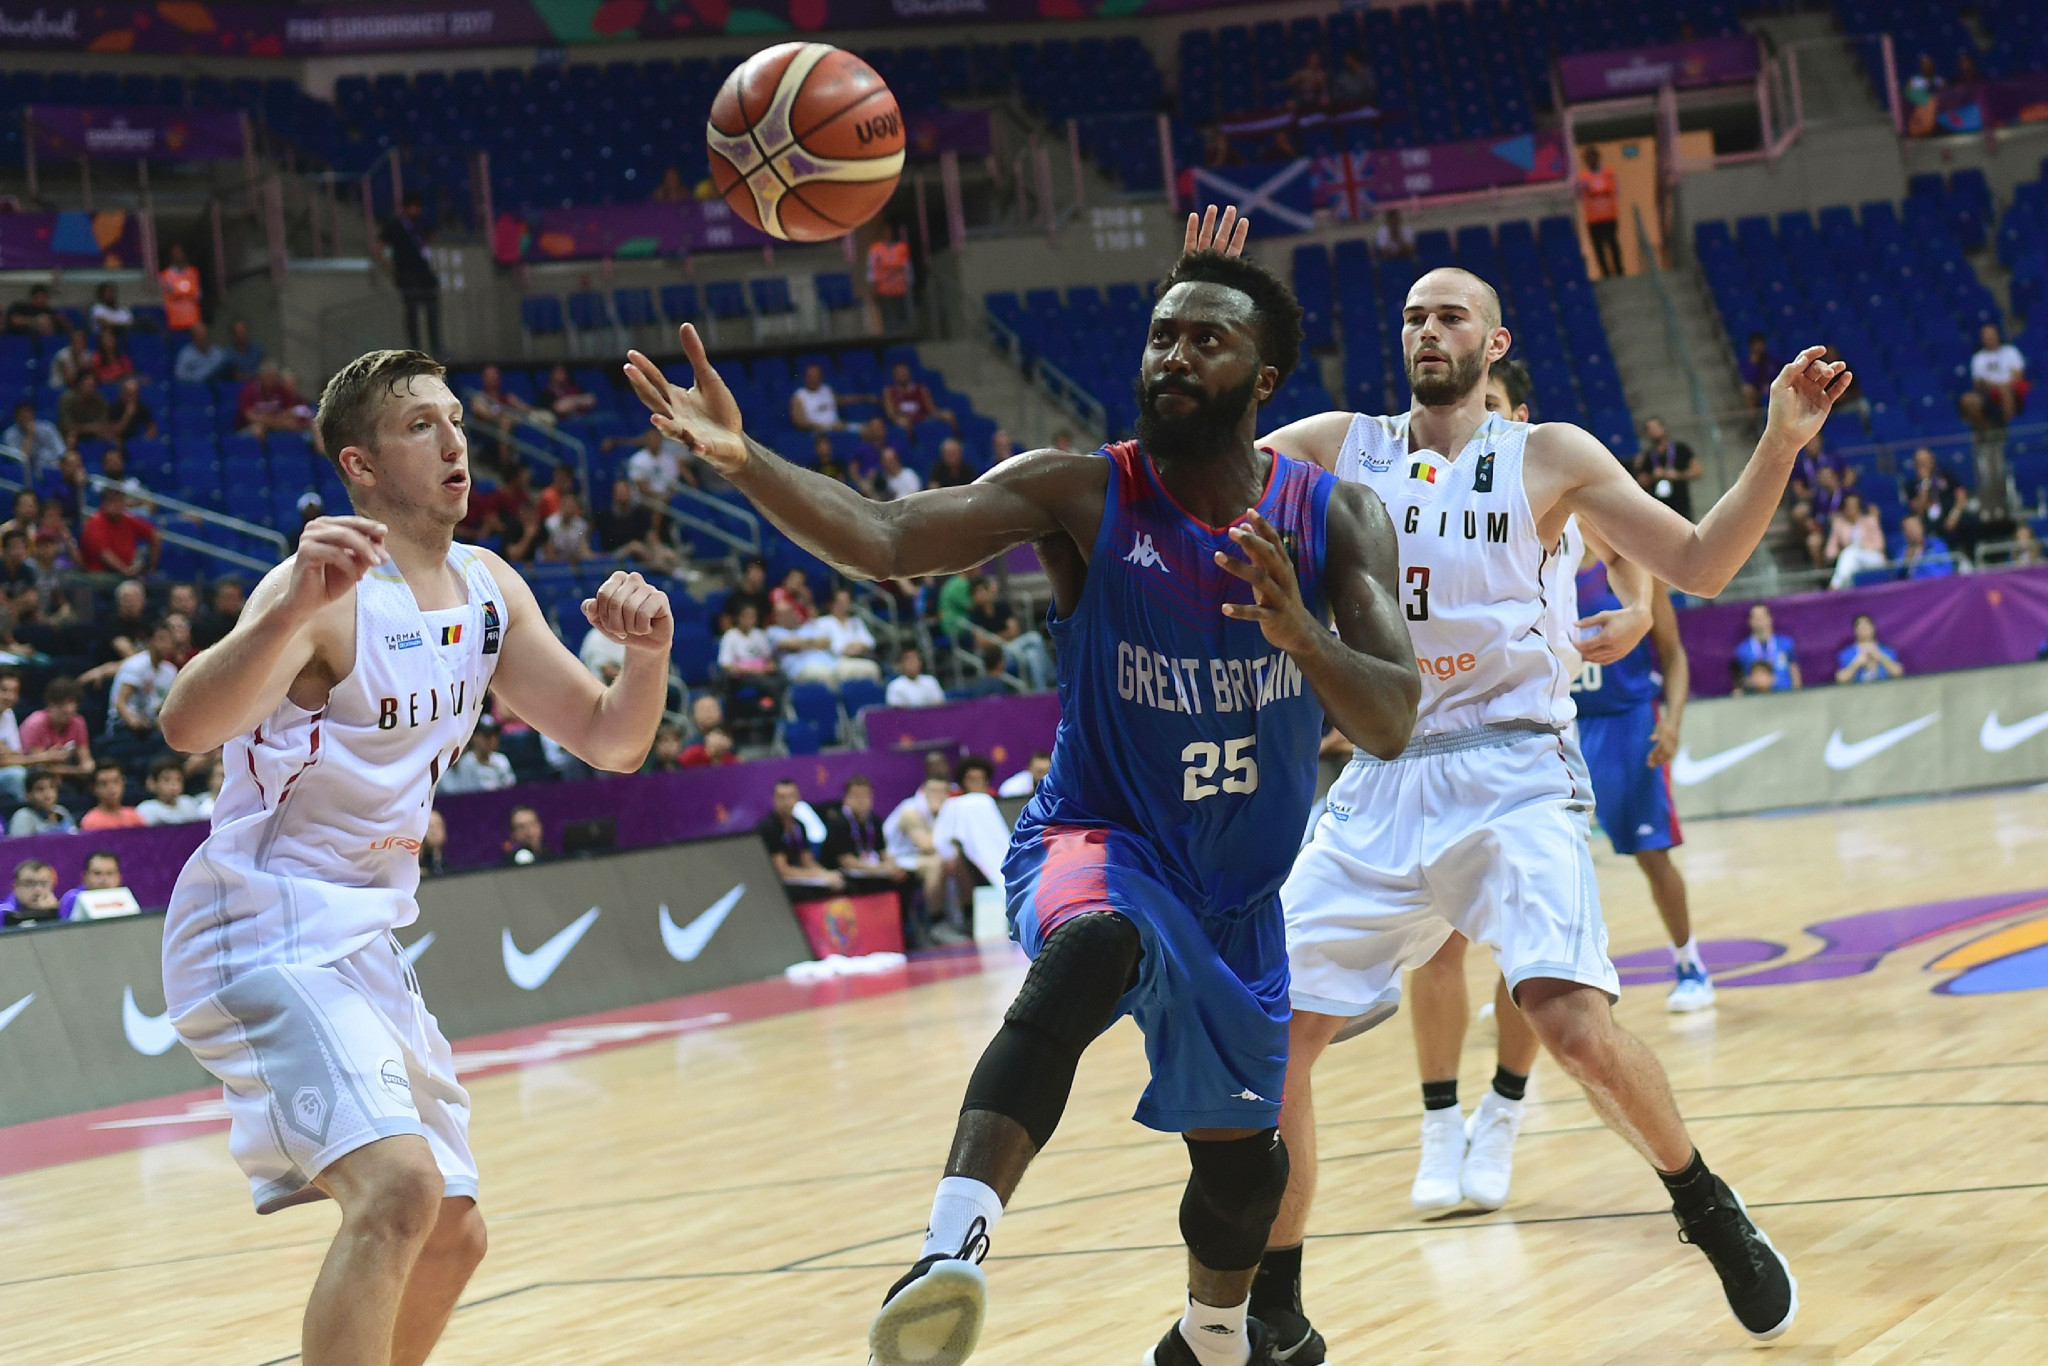 Great Britain's basketball team are under threat due to the funding problems ©Getty Images